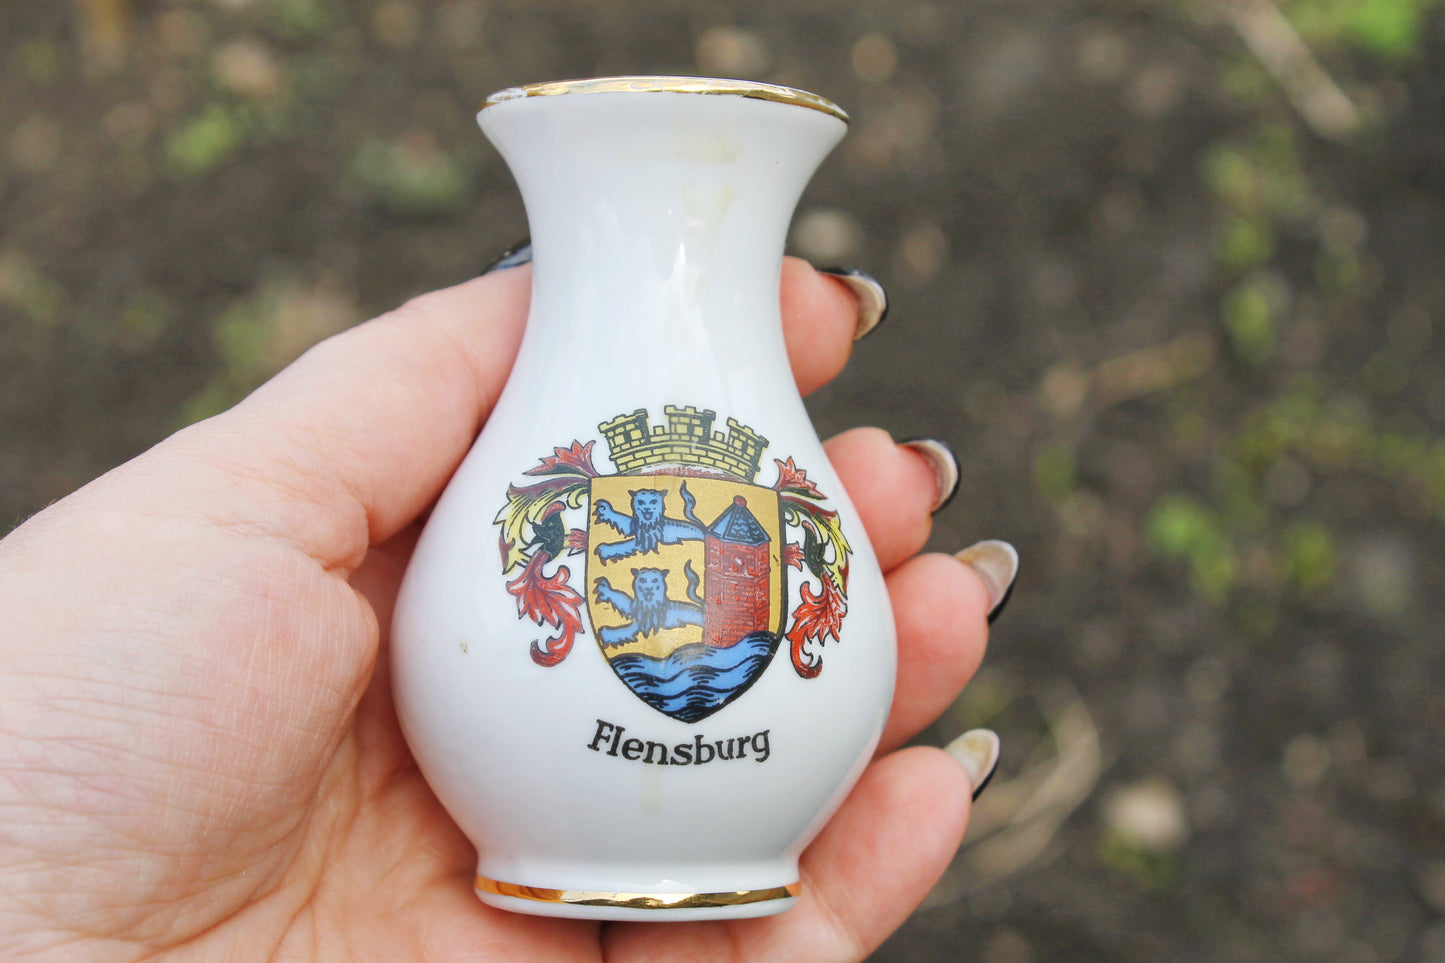 Vintage porcelain small vase - Flensburg town - 3.4 inches - made in Germany - cute vintage mini vase - 1980s